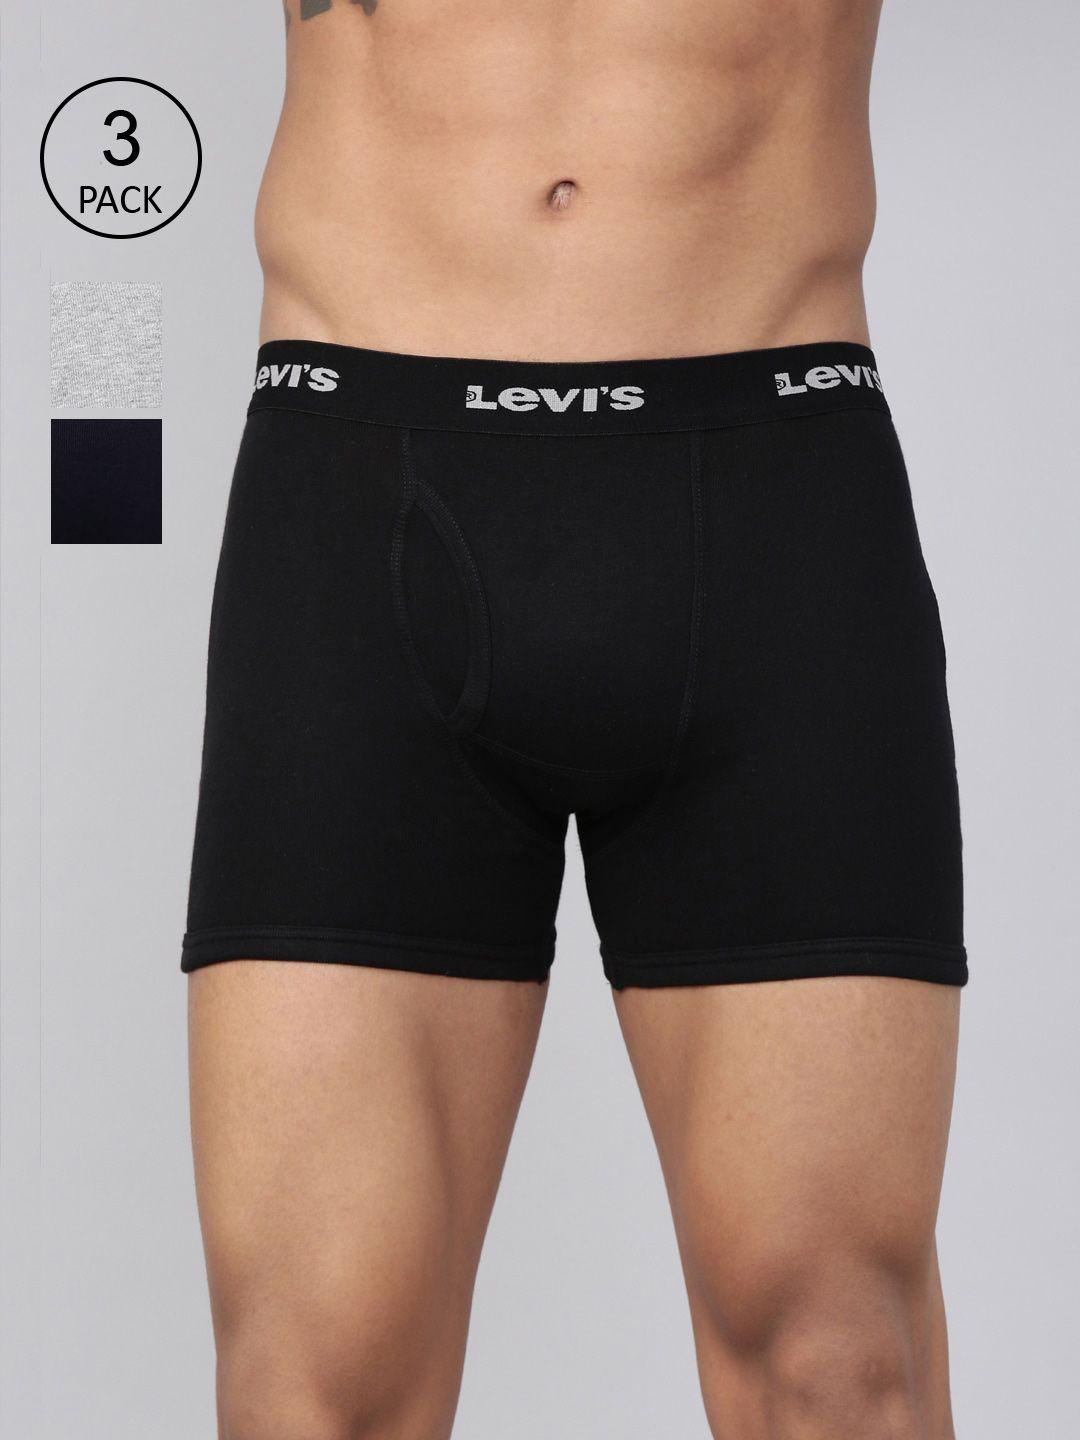 levis-pack-of-3-smartskin-technology-cotton-trunks-with-tag-free-comfort-#001-boxer-brief